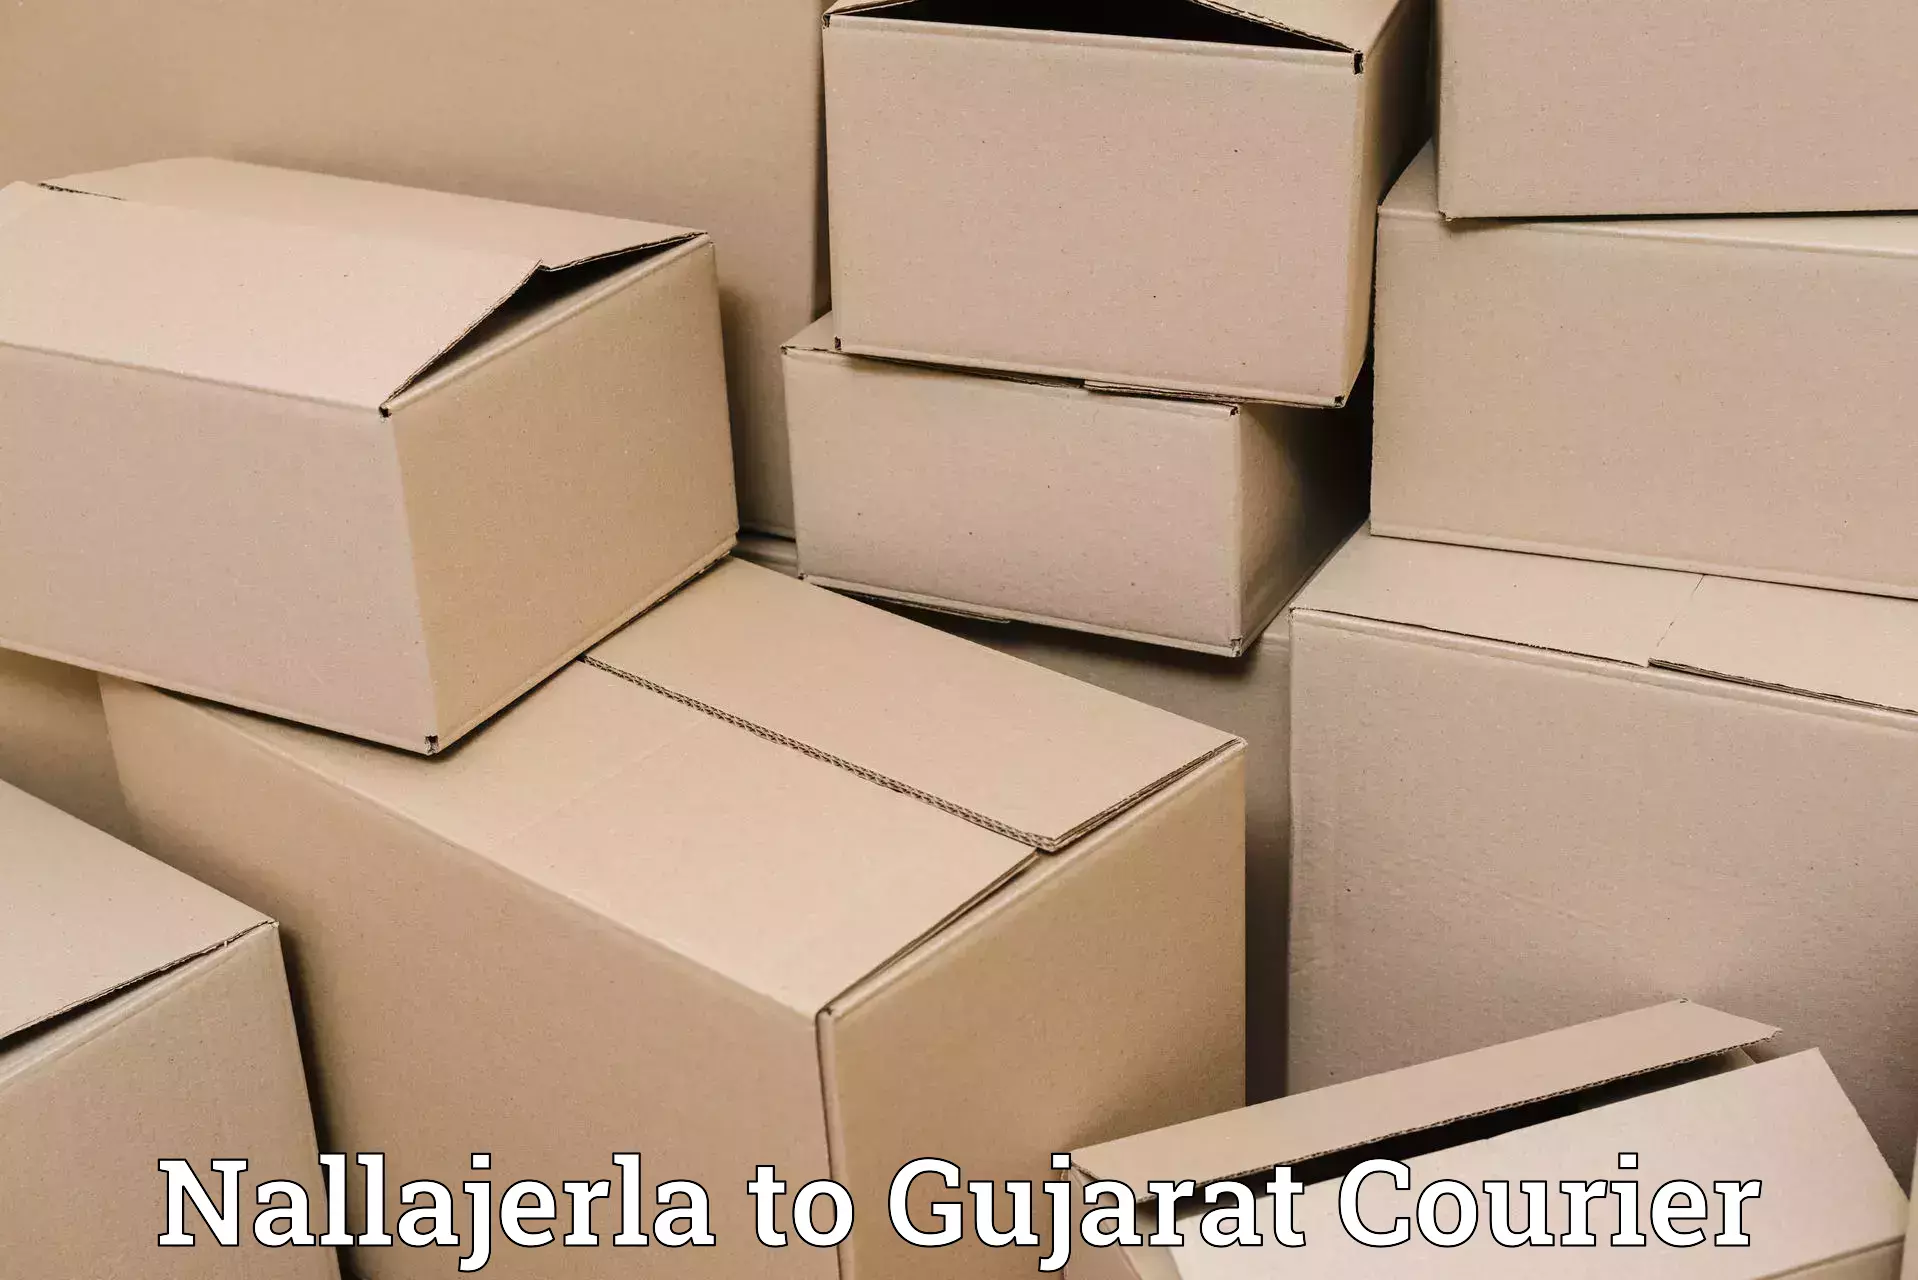 Quality courier services in Nallajerla to Gujarat